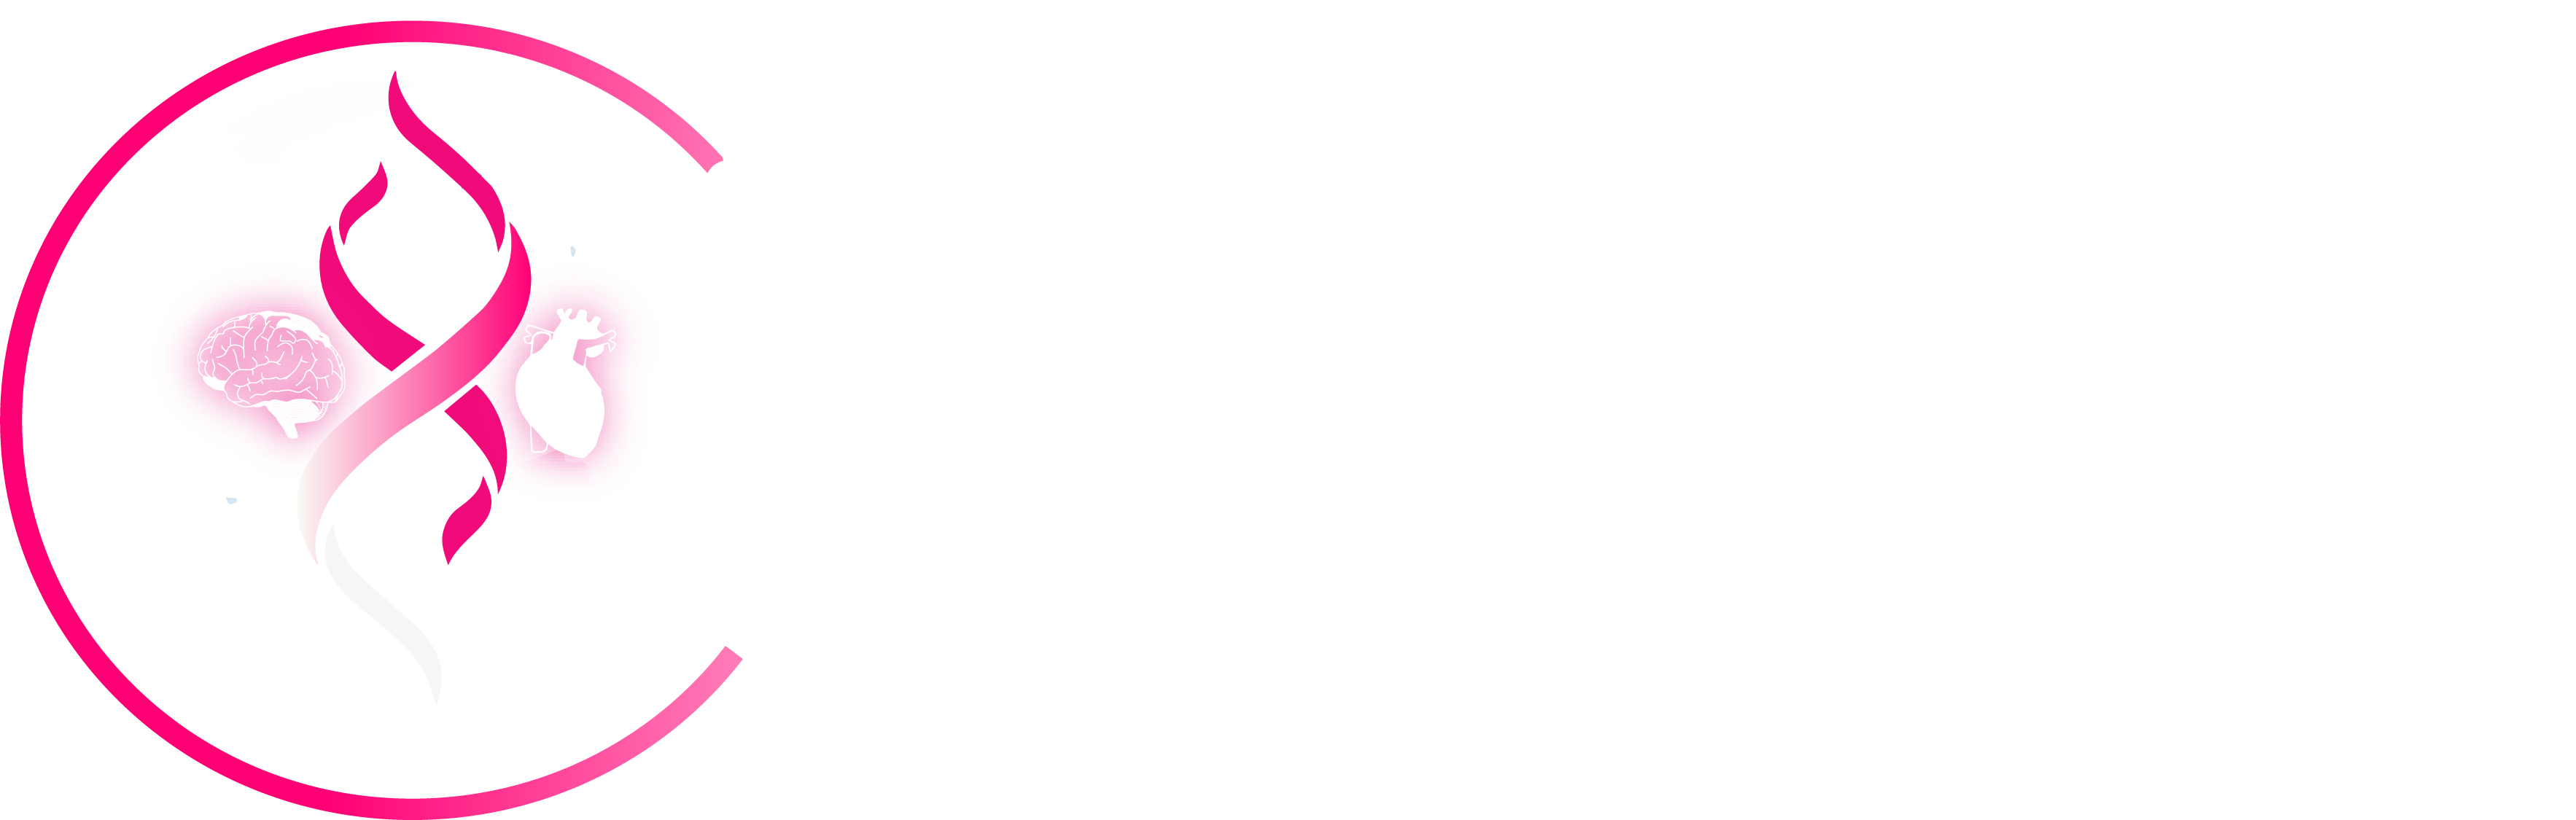 World Conference Series